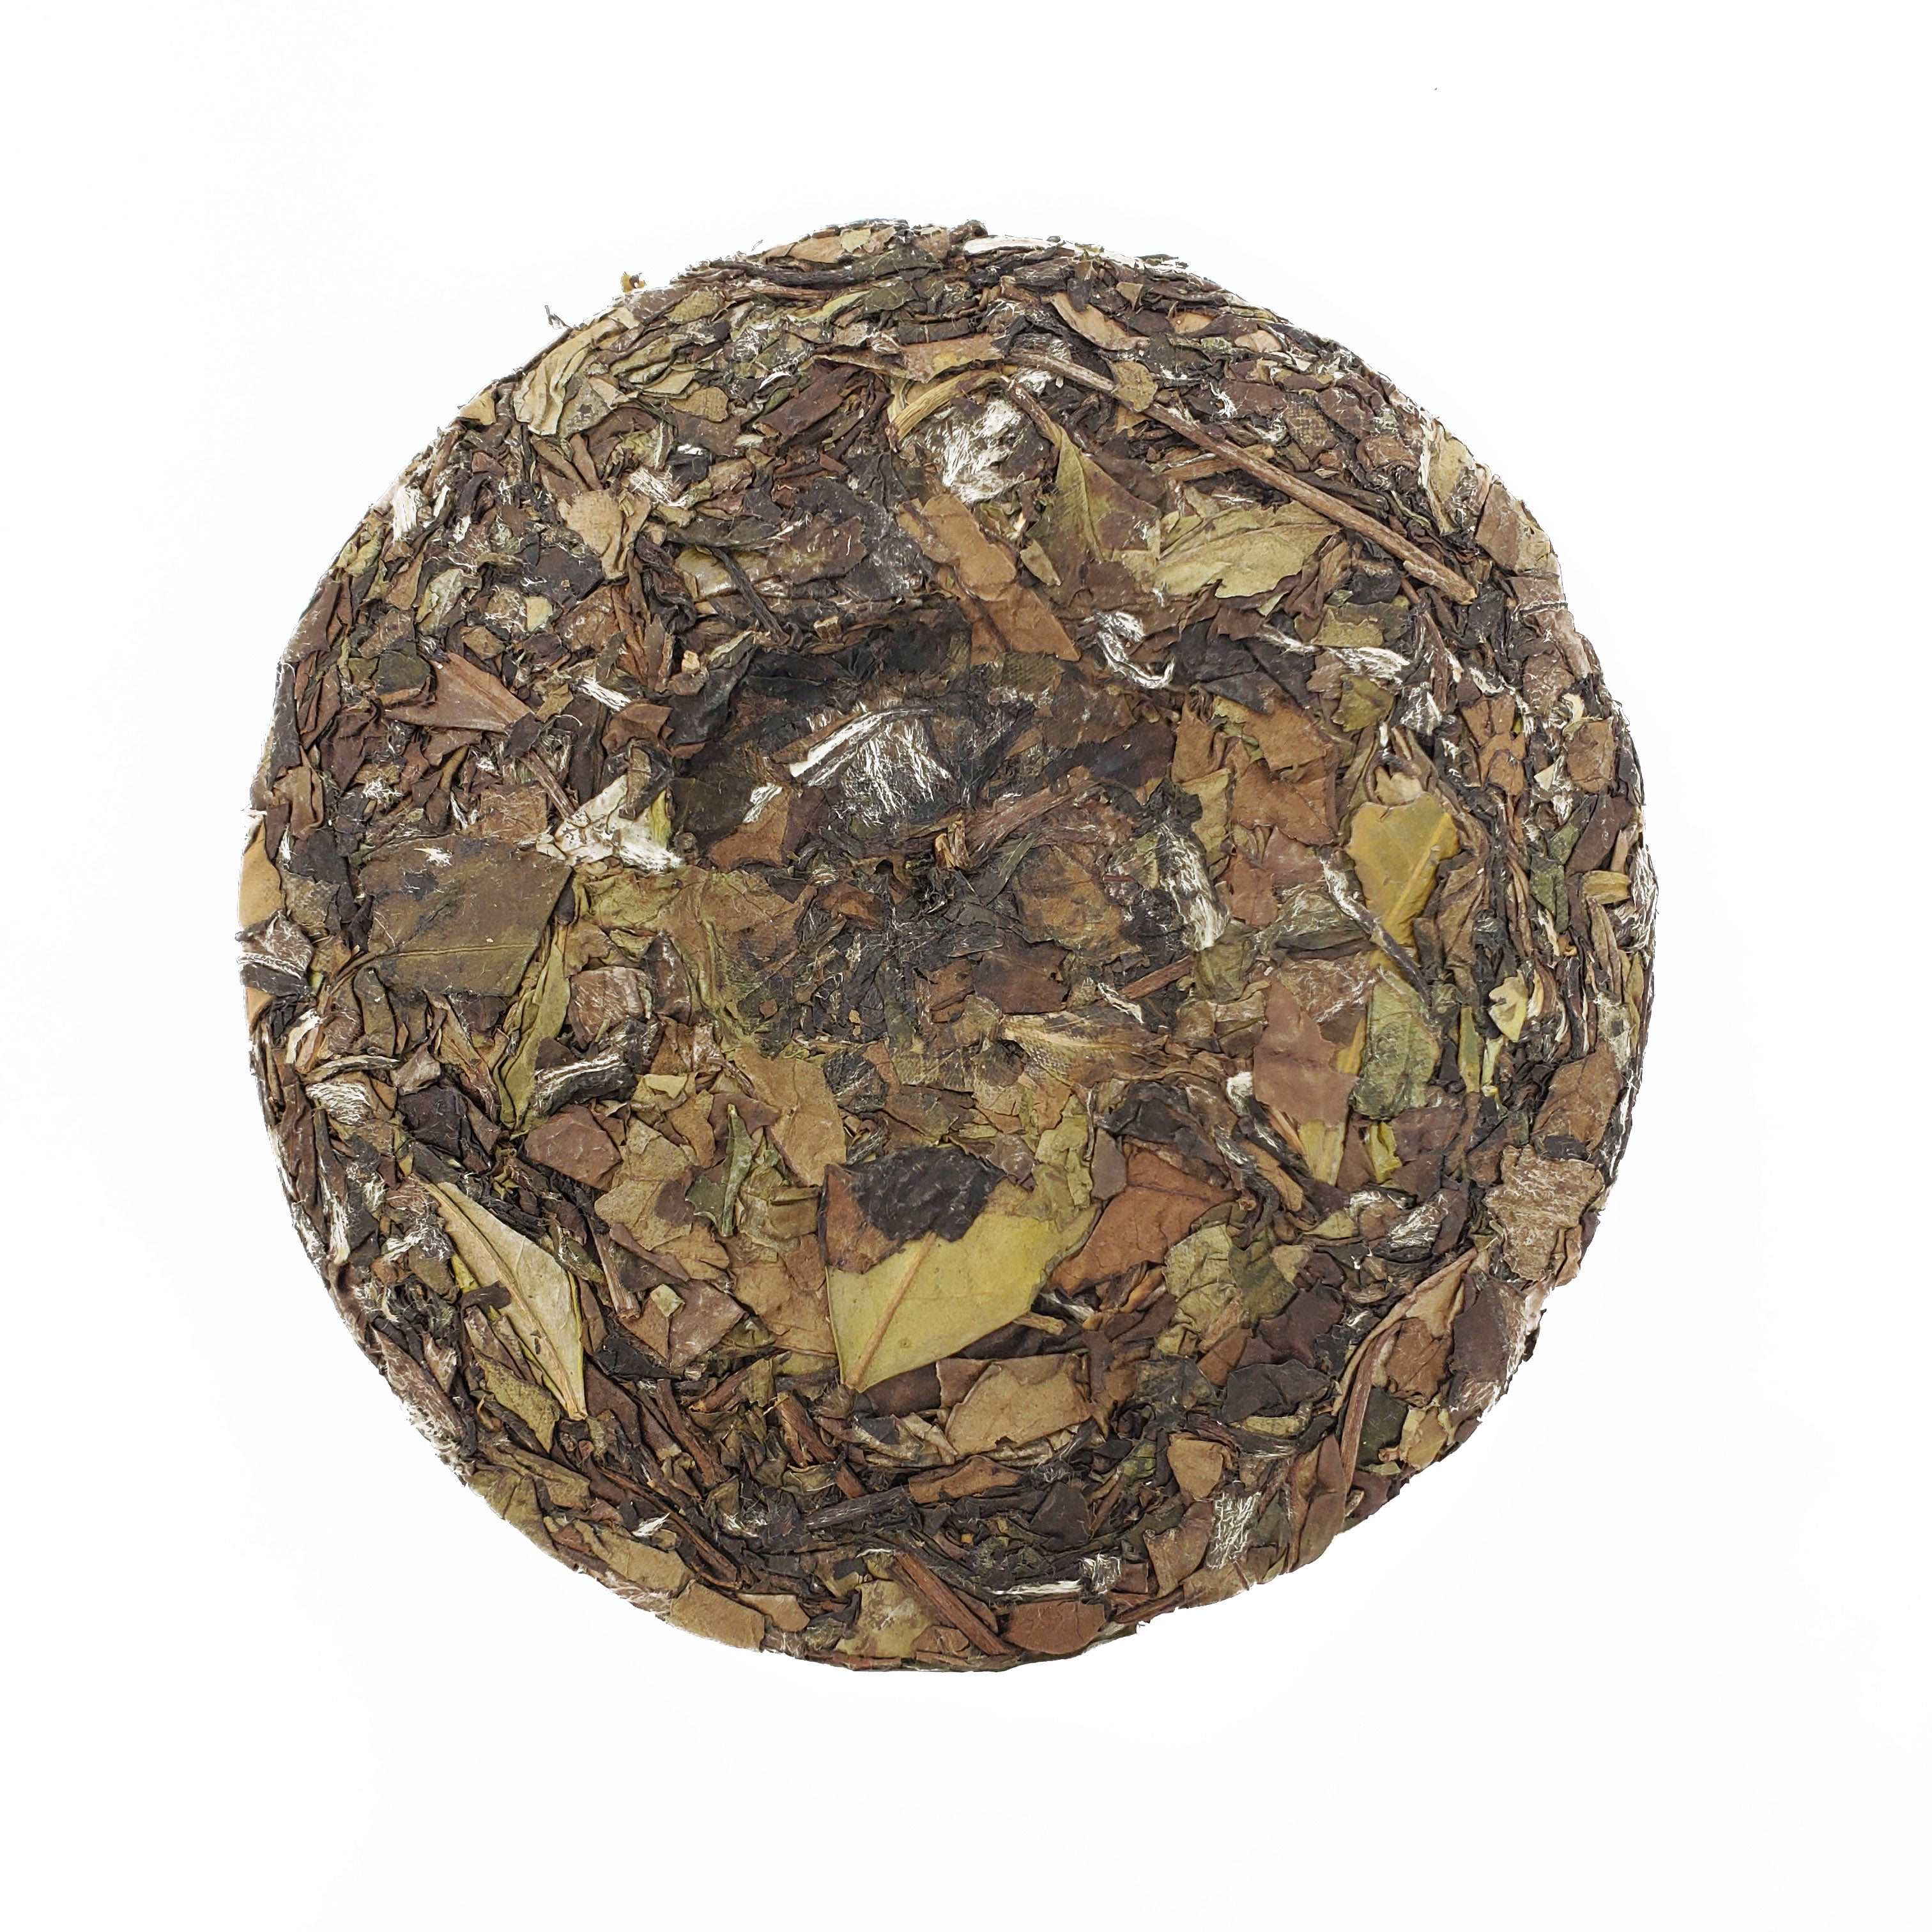  2016 Fuding White Tea Cake by Tea and Whisk Tea and Whisk Perfumarie